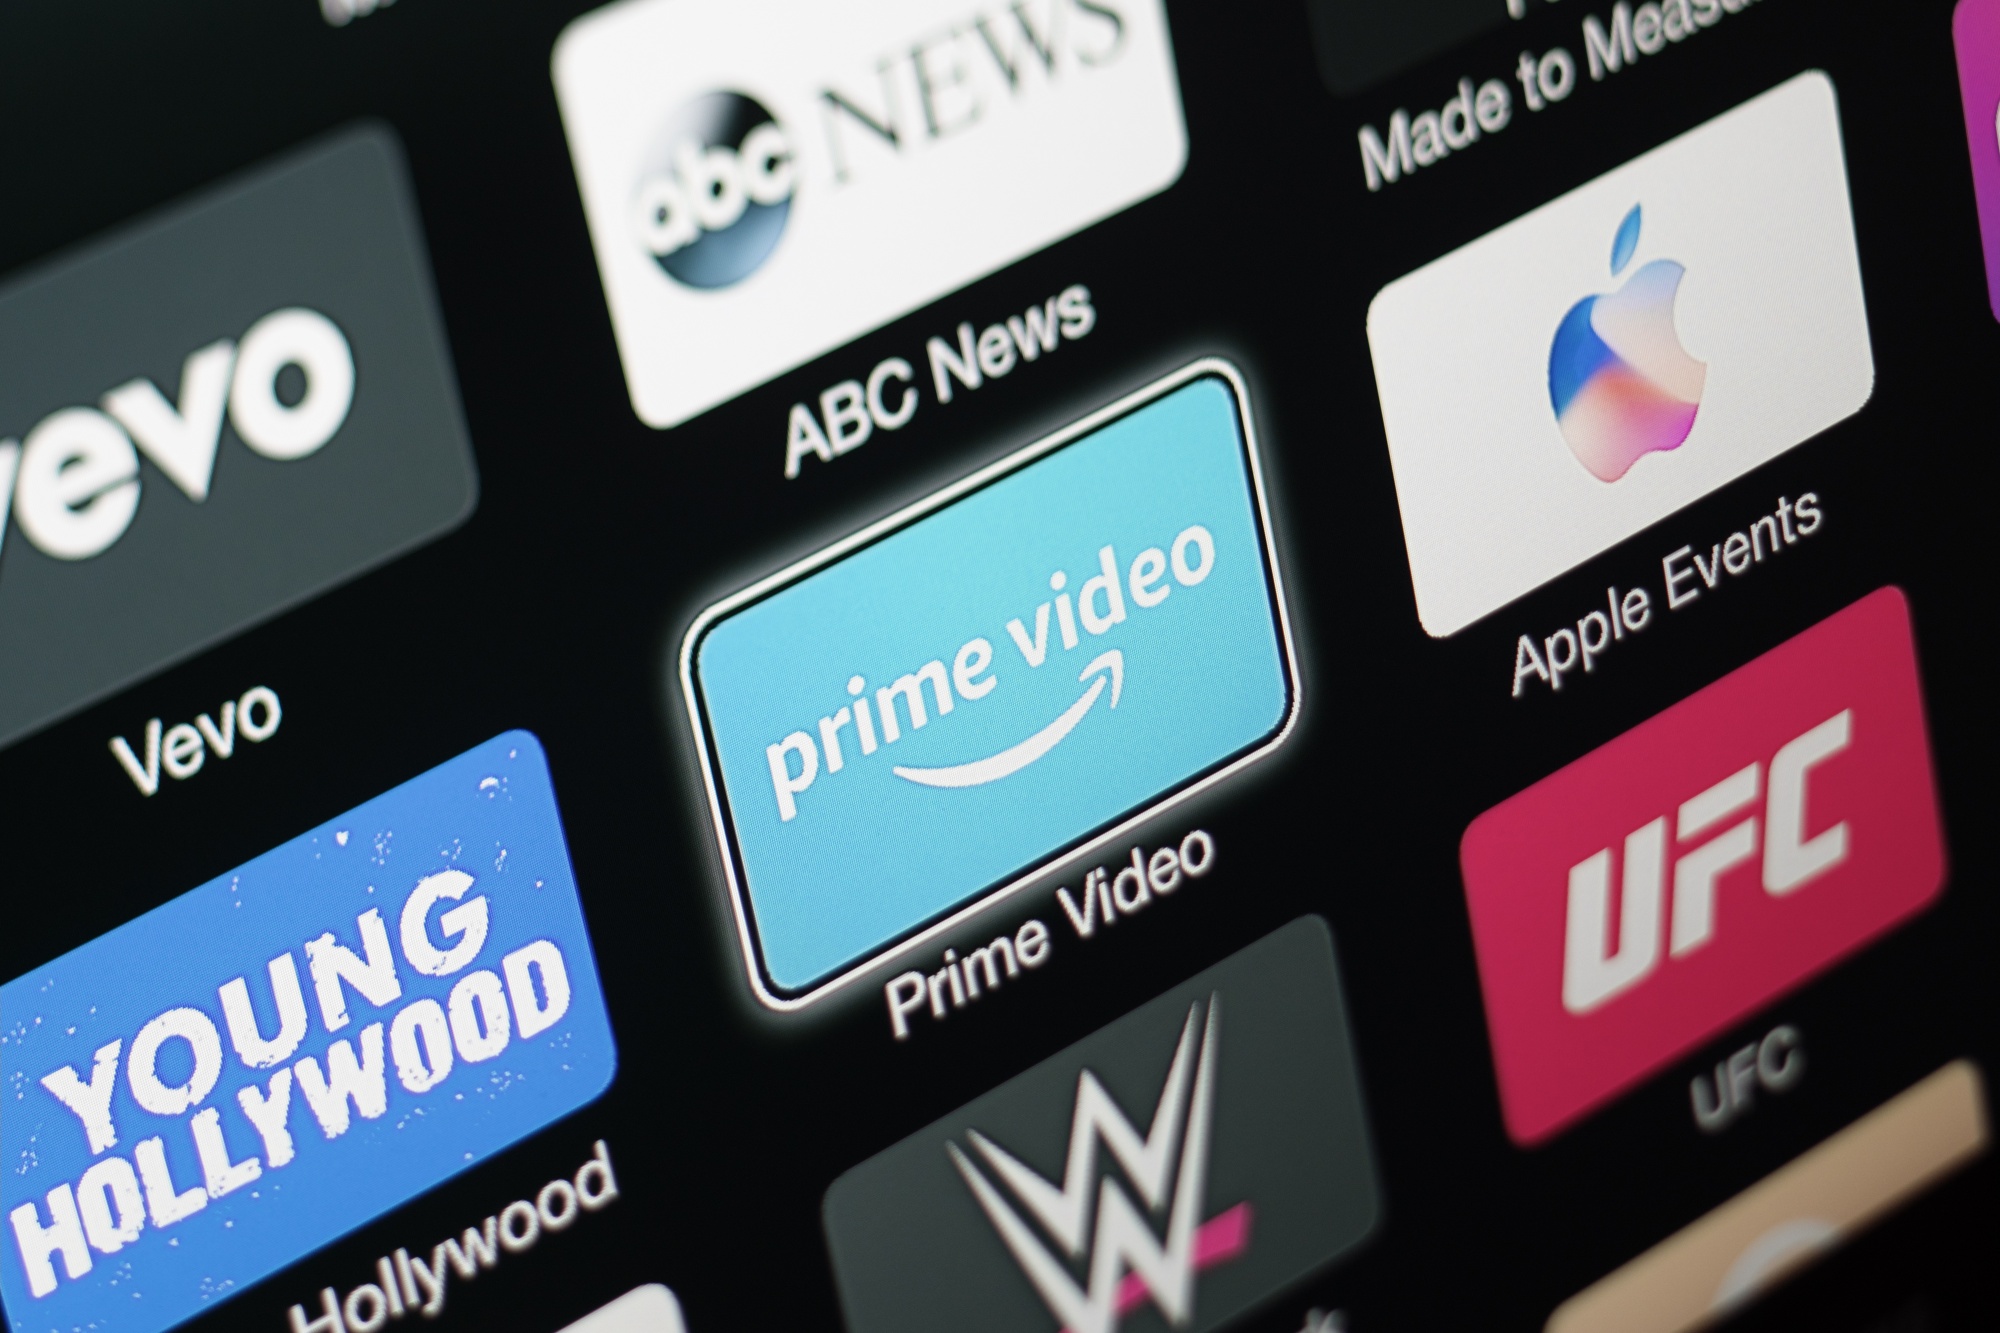 Prime Video joins Netflix, Disney+ with streaming ads